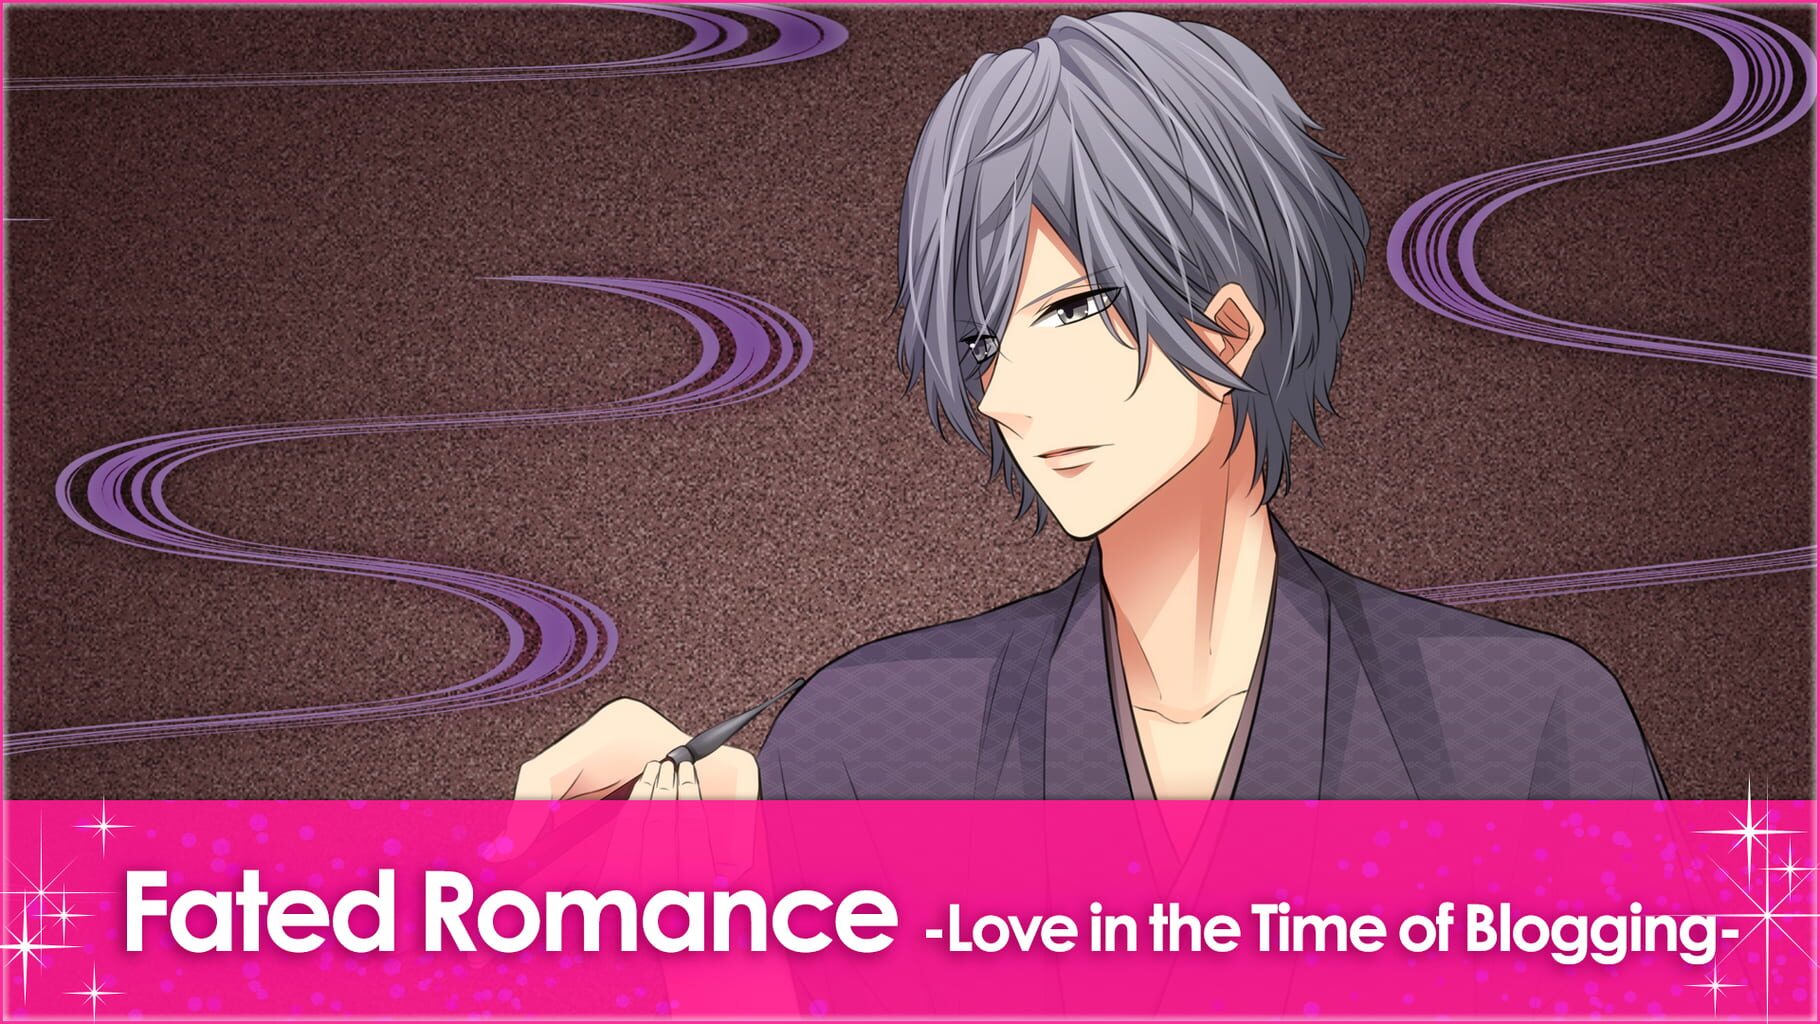 Enchanted in the Moonlight: Fated Romance - Love in the Time of Blogging artwork